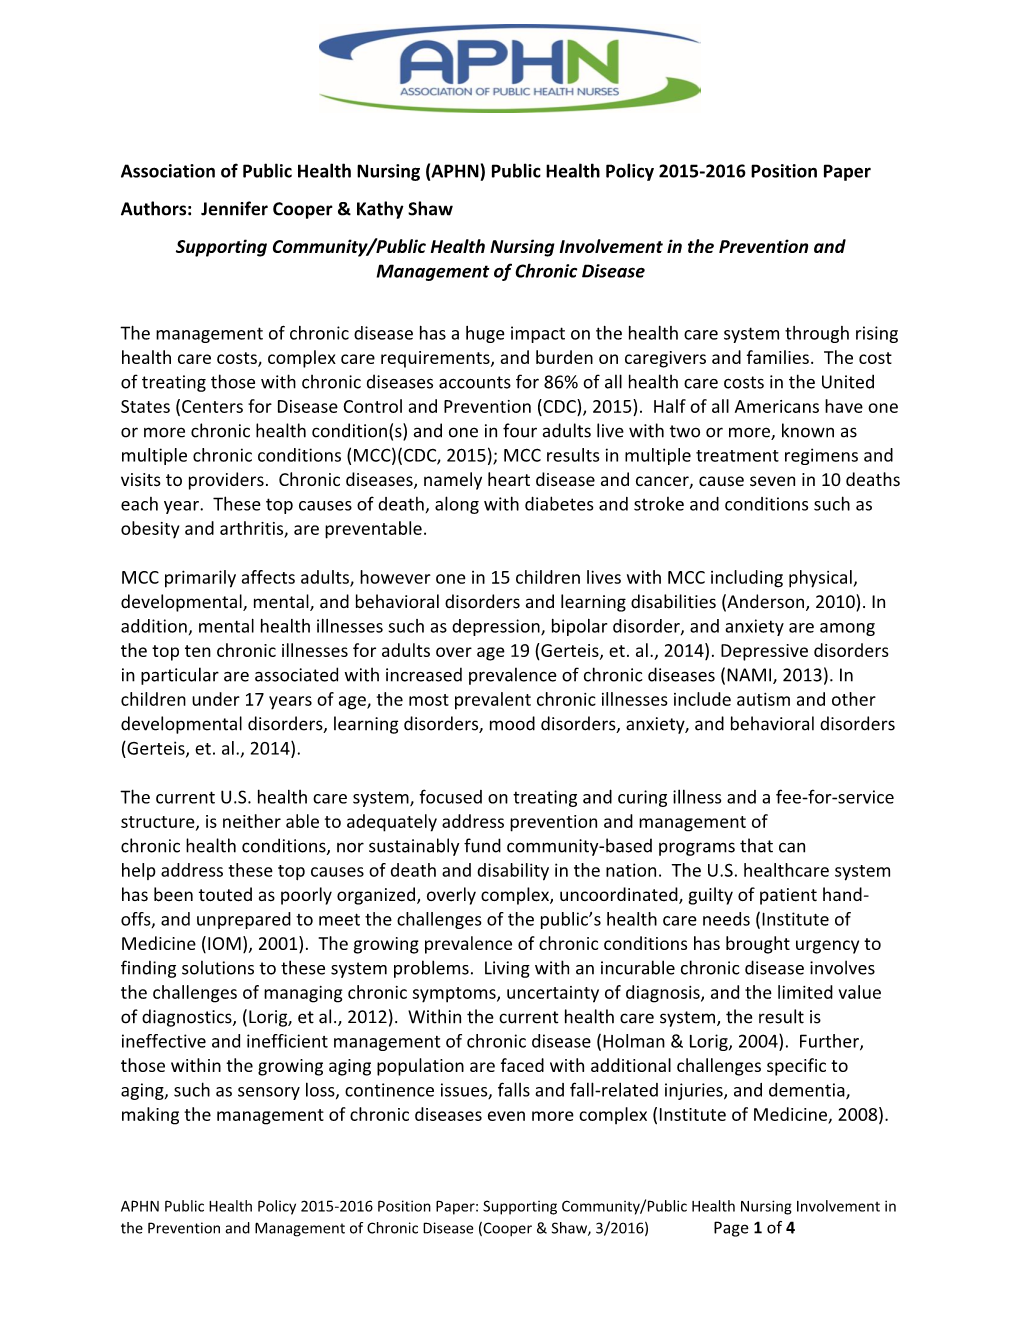 (APHN) Public Health Policy 2015-2016 Position Paper Authors